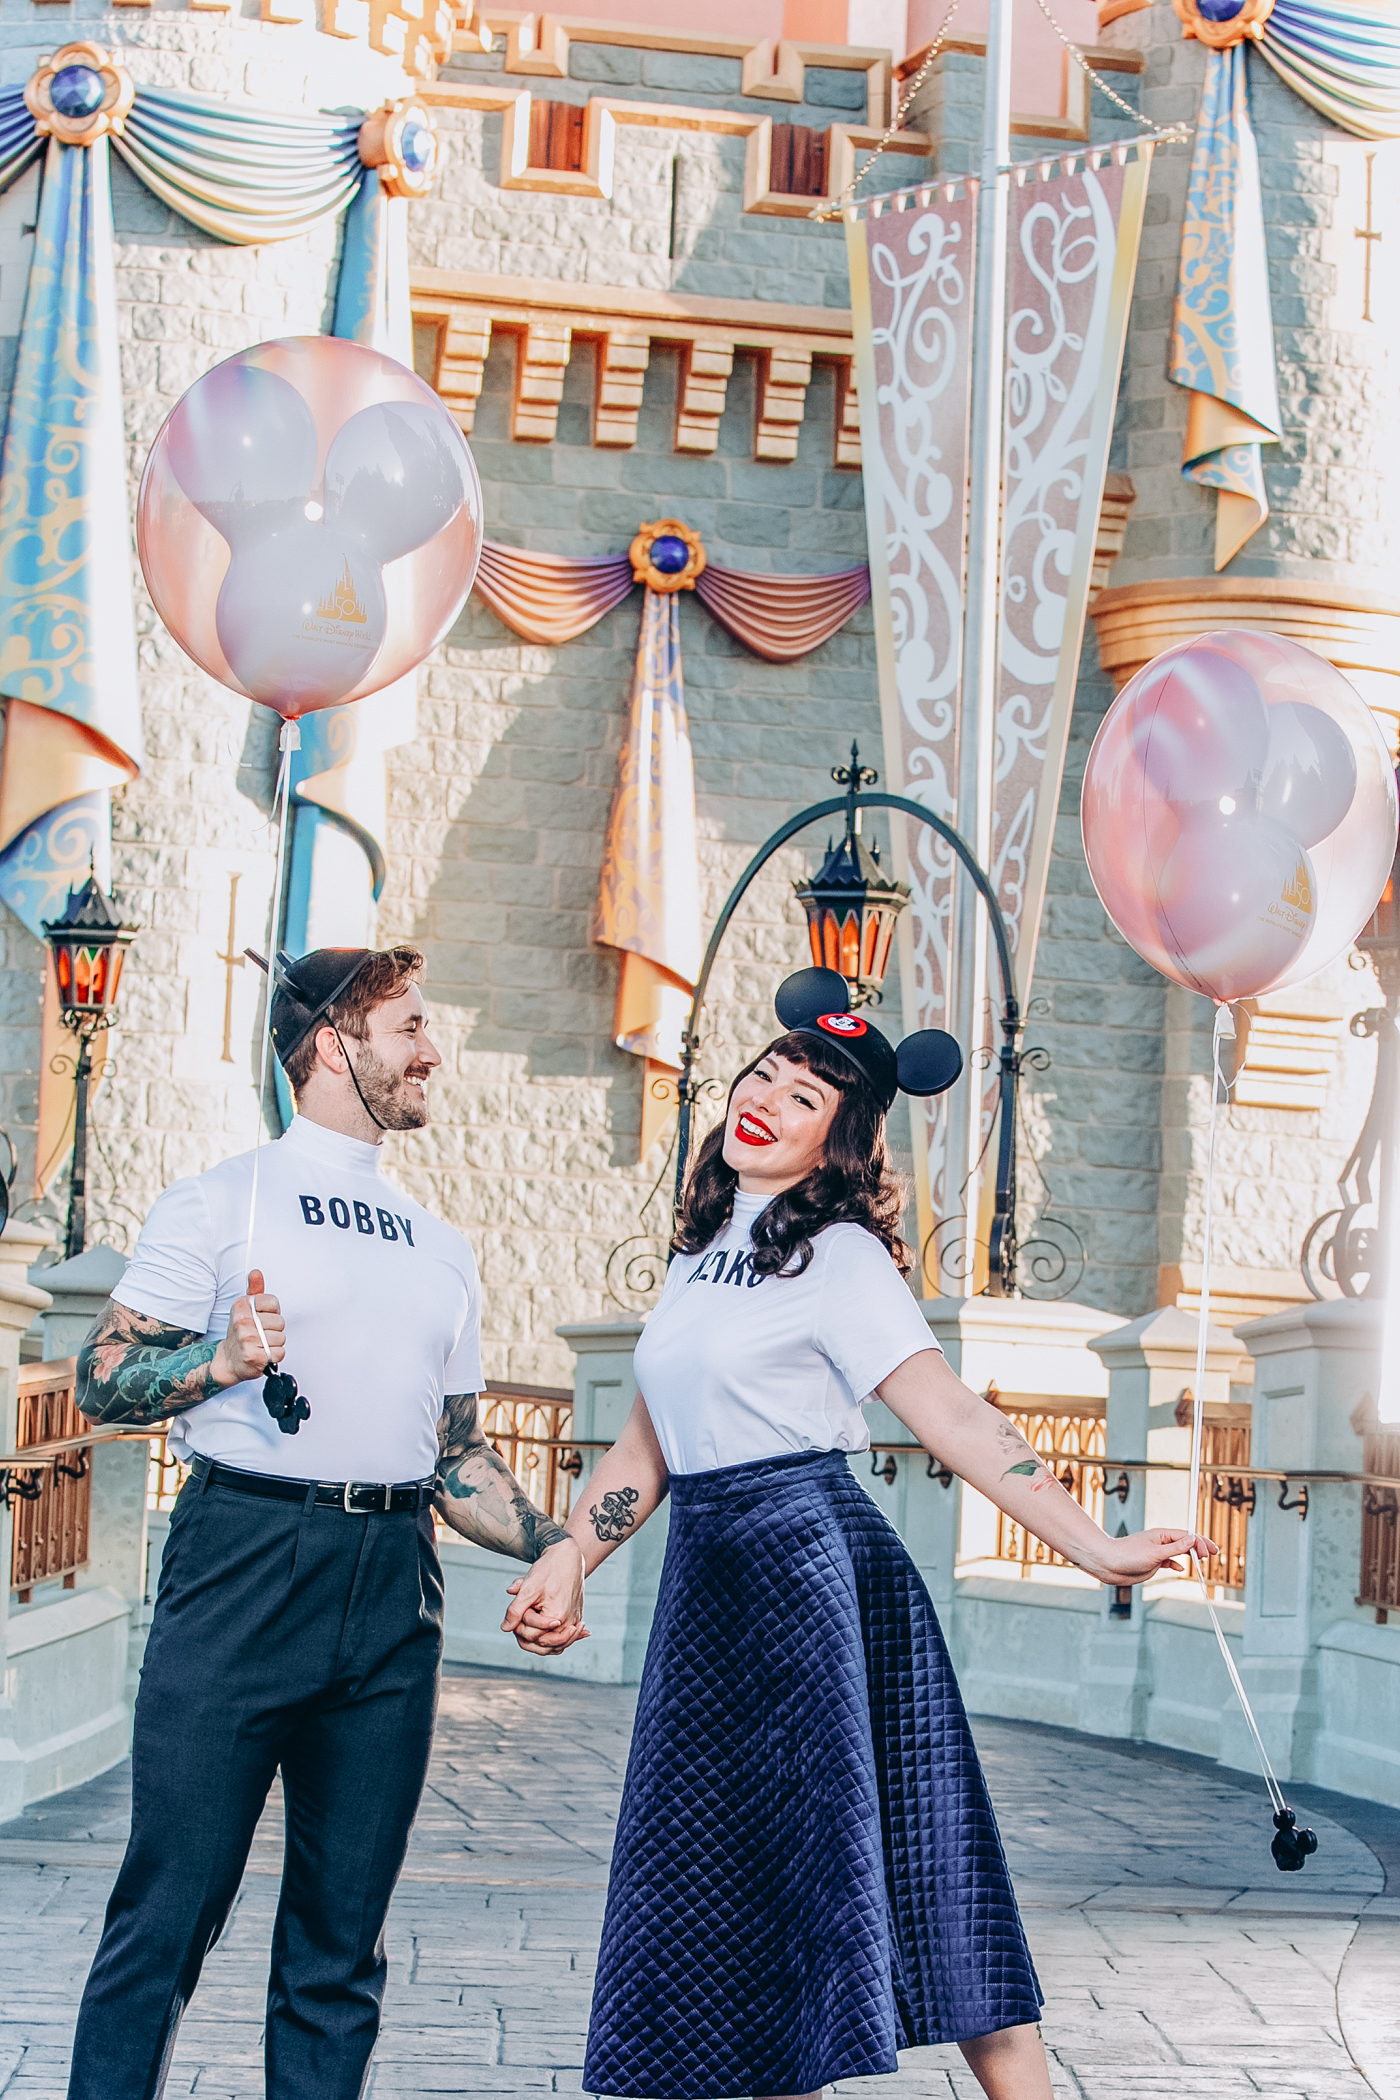 bobby and keiko in their private photo shoot at disney